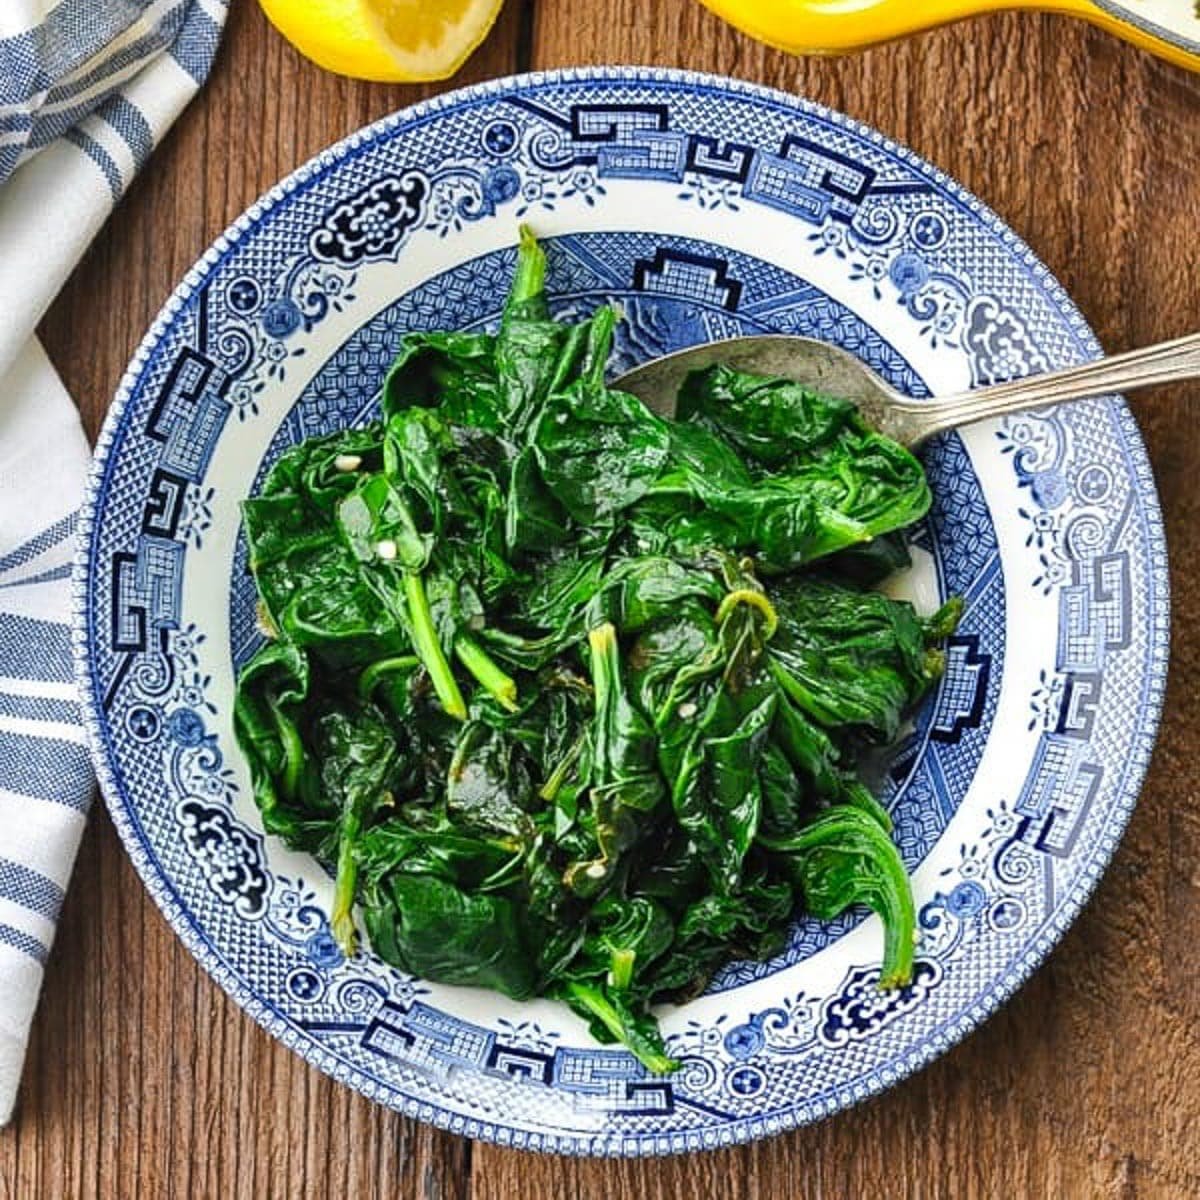 Plate of sauteed spinach with garlic and lemon.